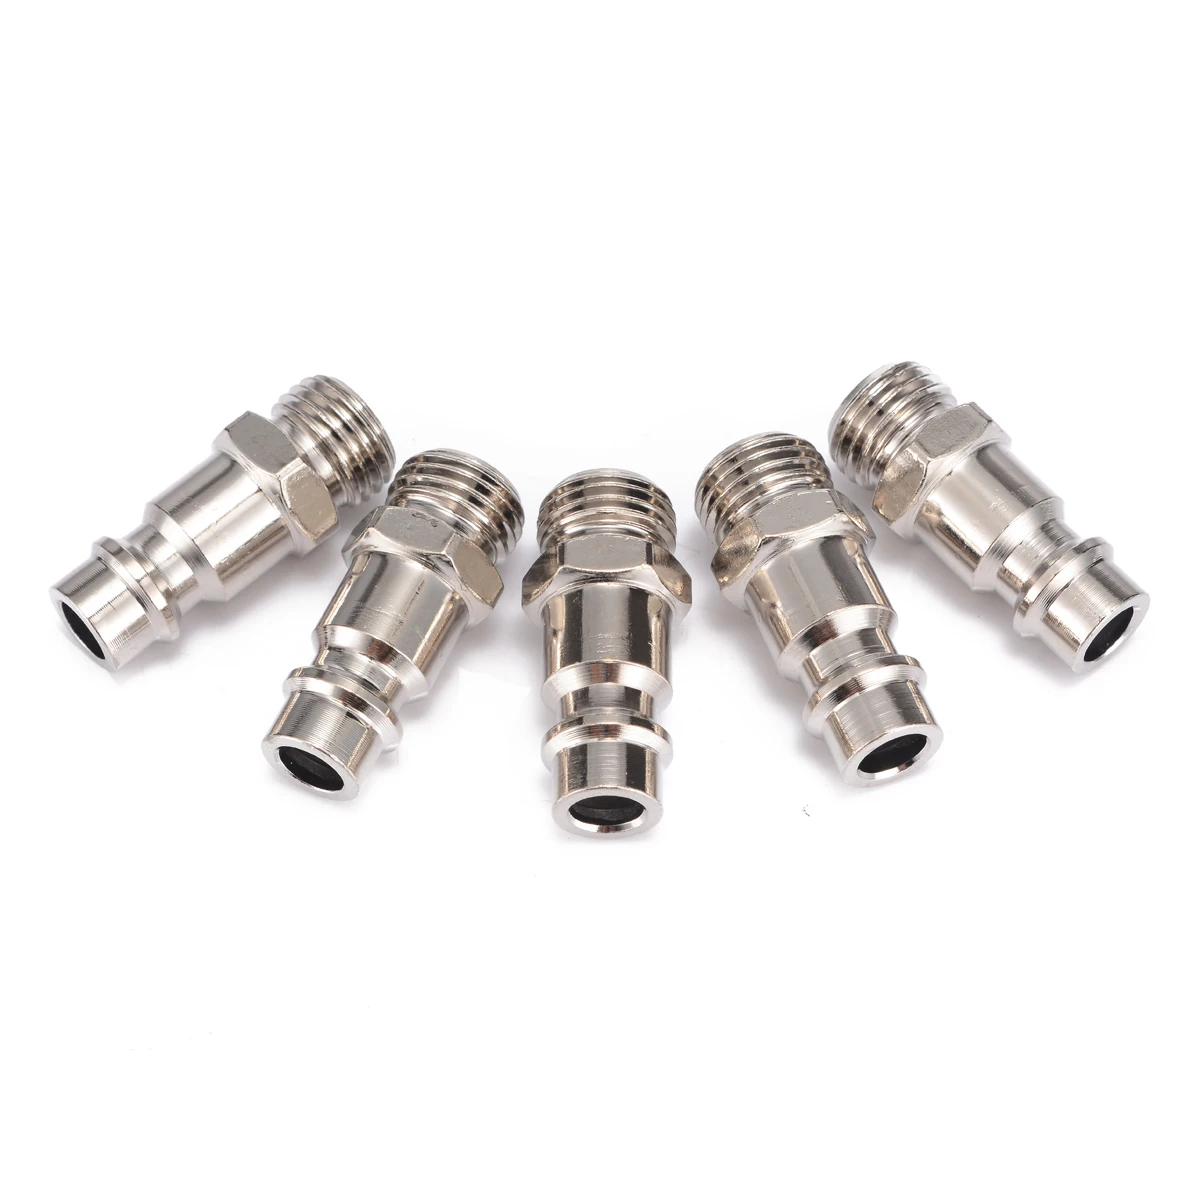 JAOMON 12Pcs 1/4 BSP Pneumatic Air Coupler Plug Kit Male/Female Fittings Quick Release Air Line Hose Fitting Couplings Connector for Compressor